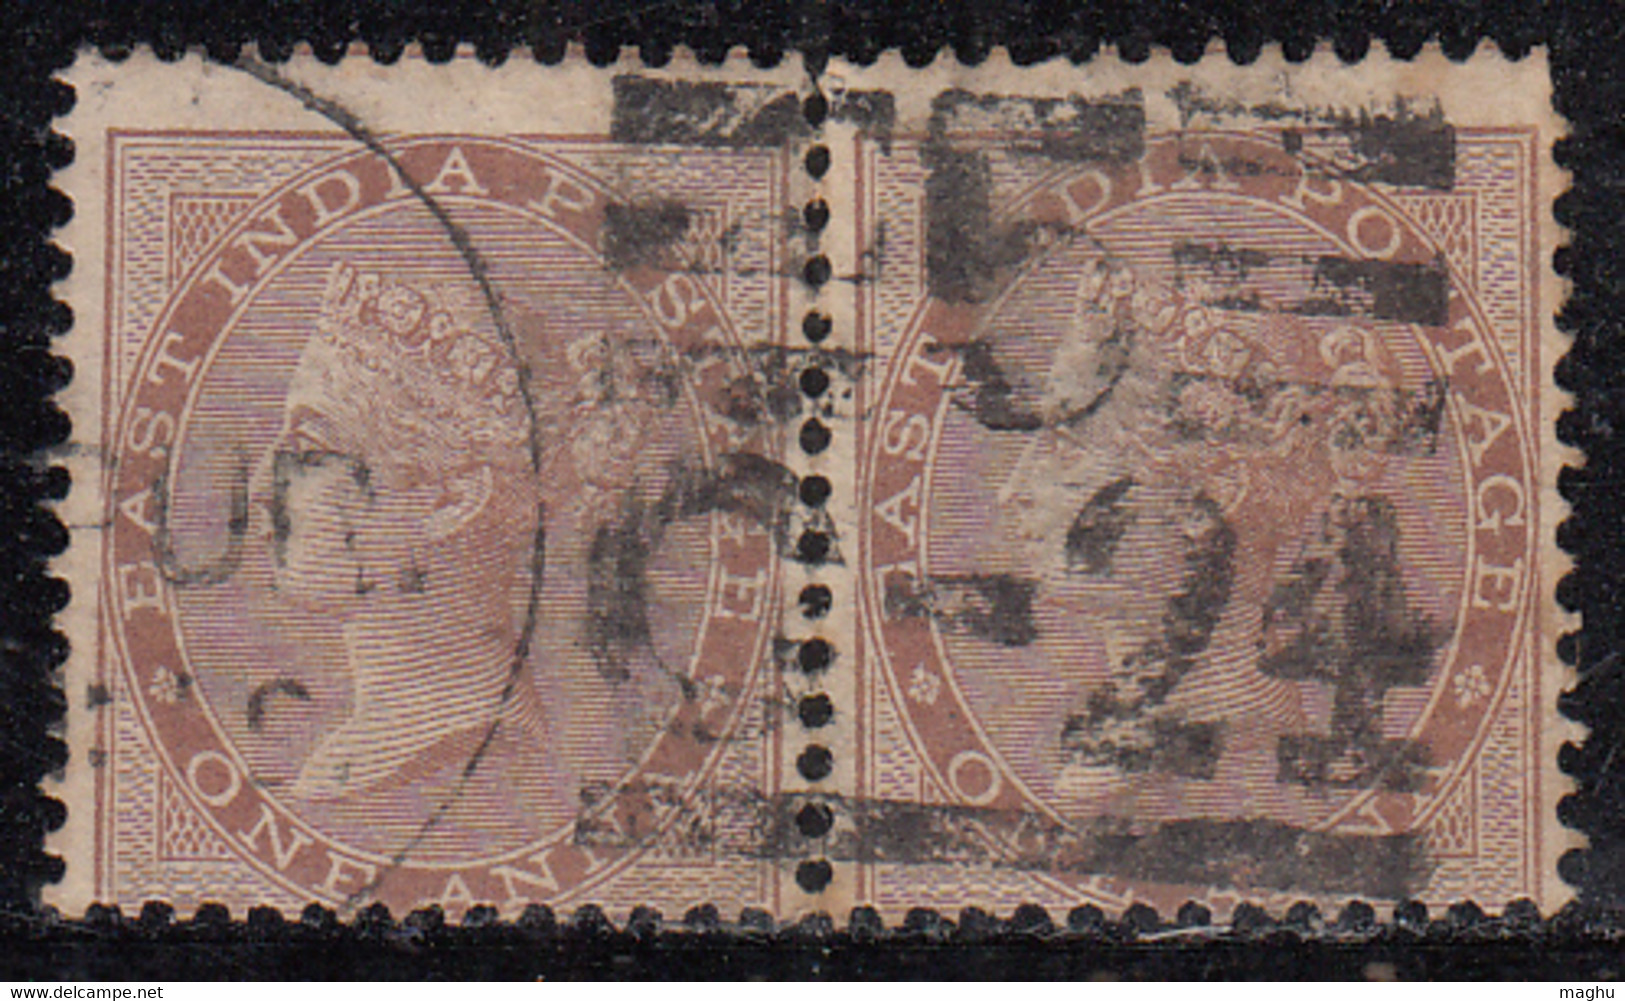 1a Pair, Strike Of JC 32c / Martin 17a On SG58  British East India, QV One Anna, Used, Elephant Watermark 1865 - 1854 East India Company Administration